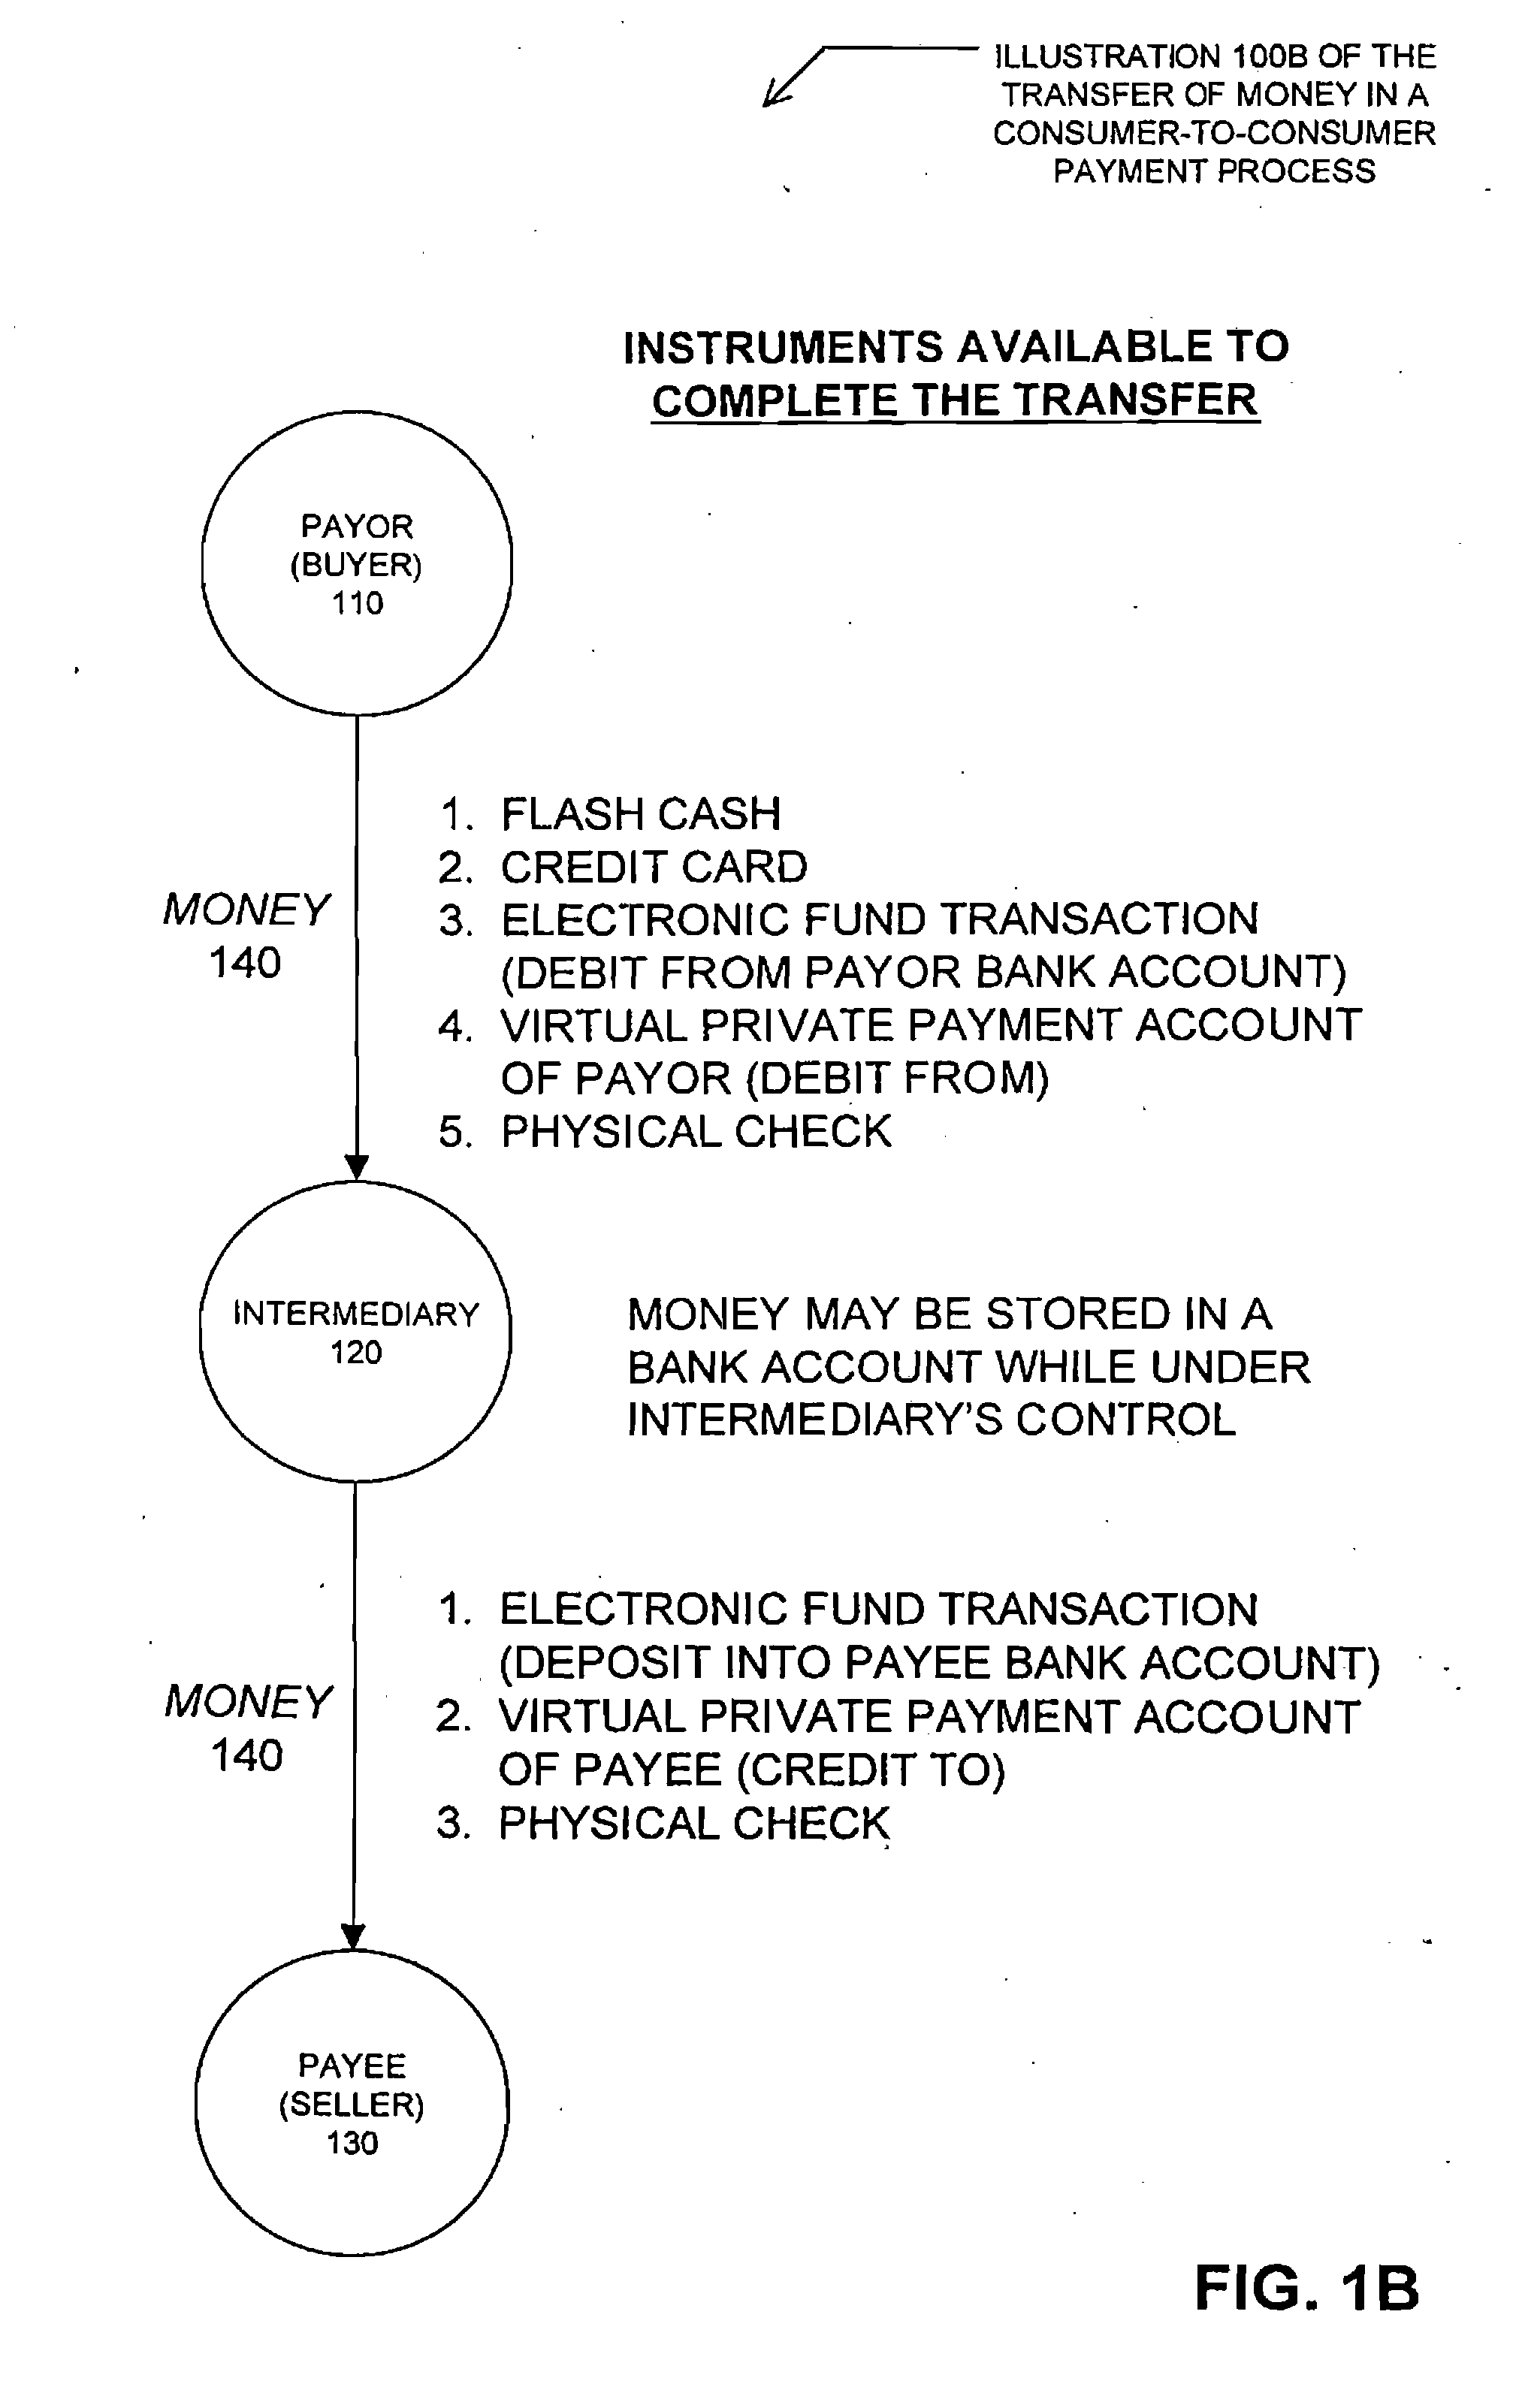 Method and system for facilitating payment of an online auction transaction